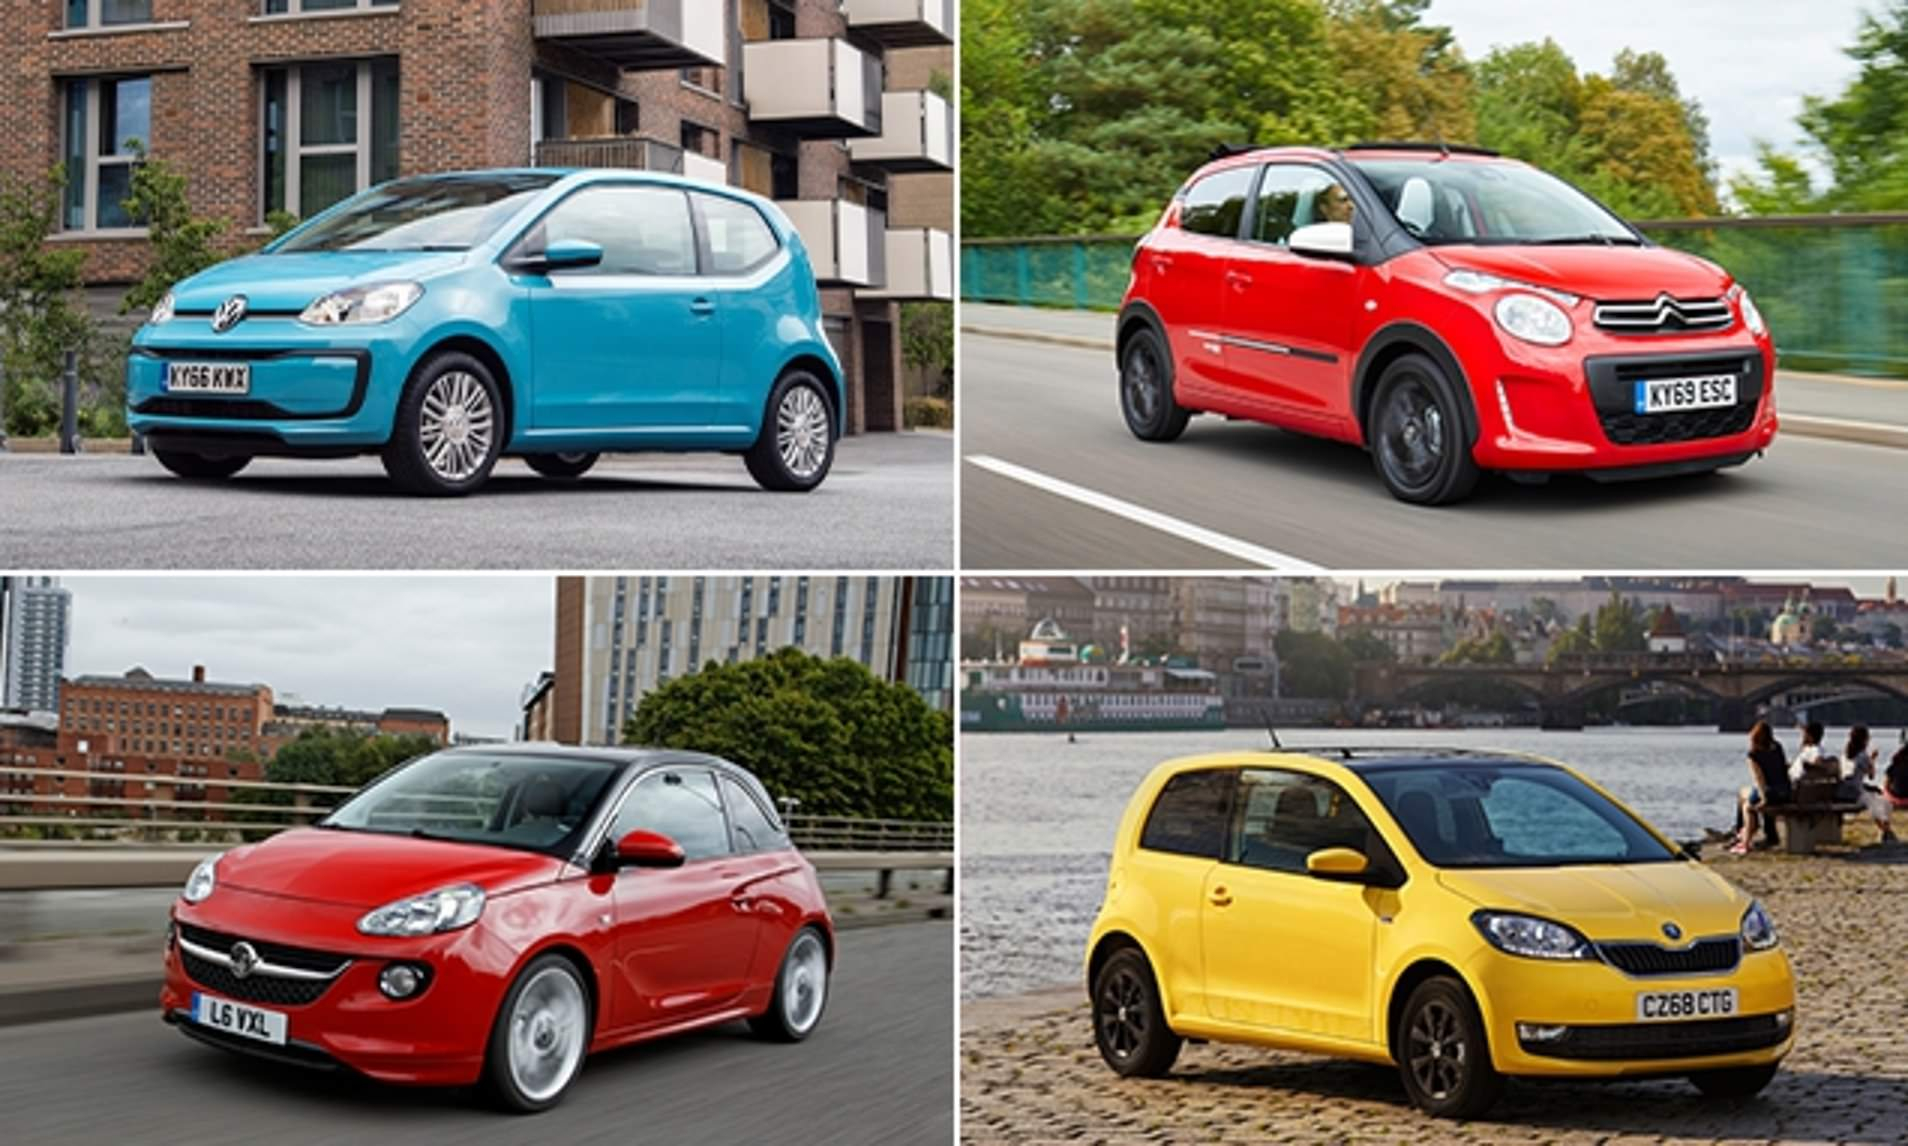 Cheapest 10 New Cars For Young Drivers To Insure In 2019 throughout proportions 1908 X 1146